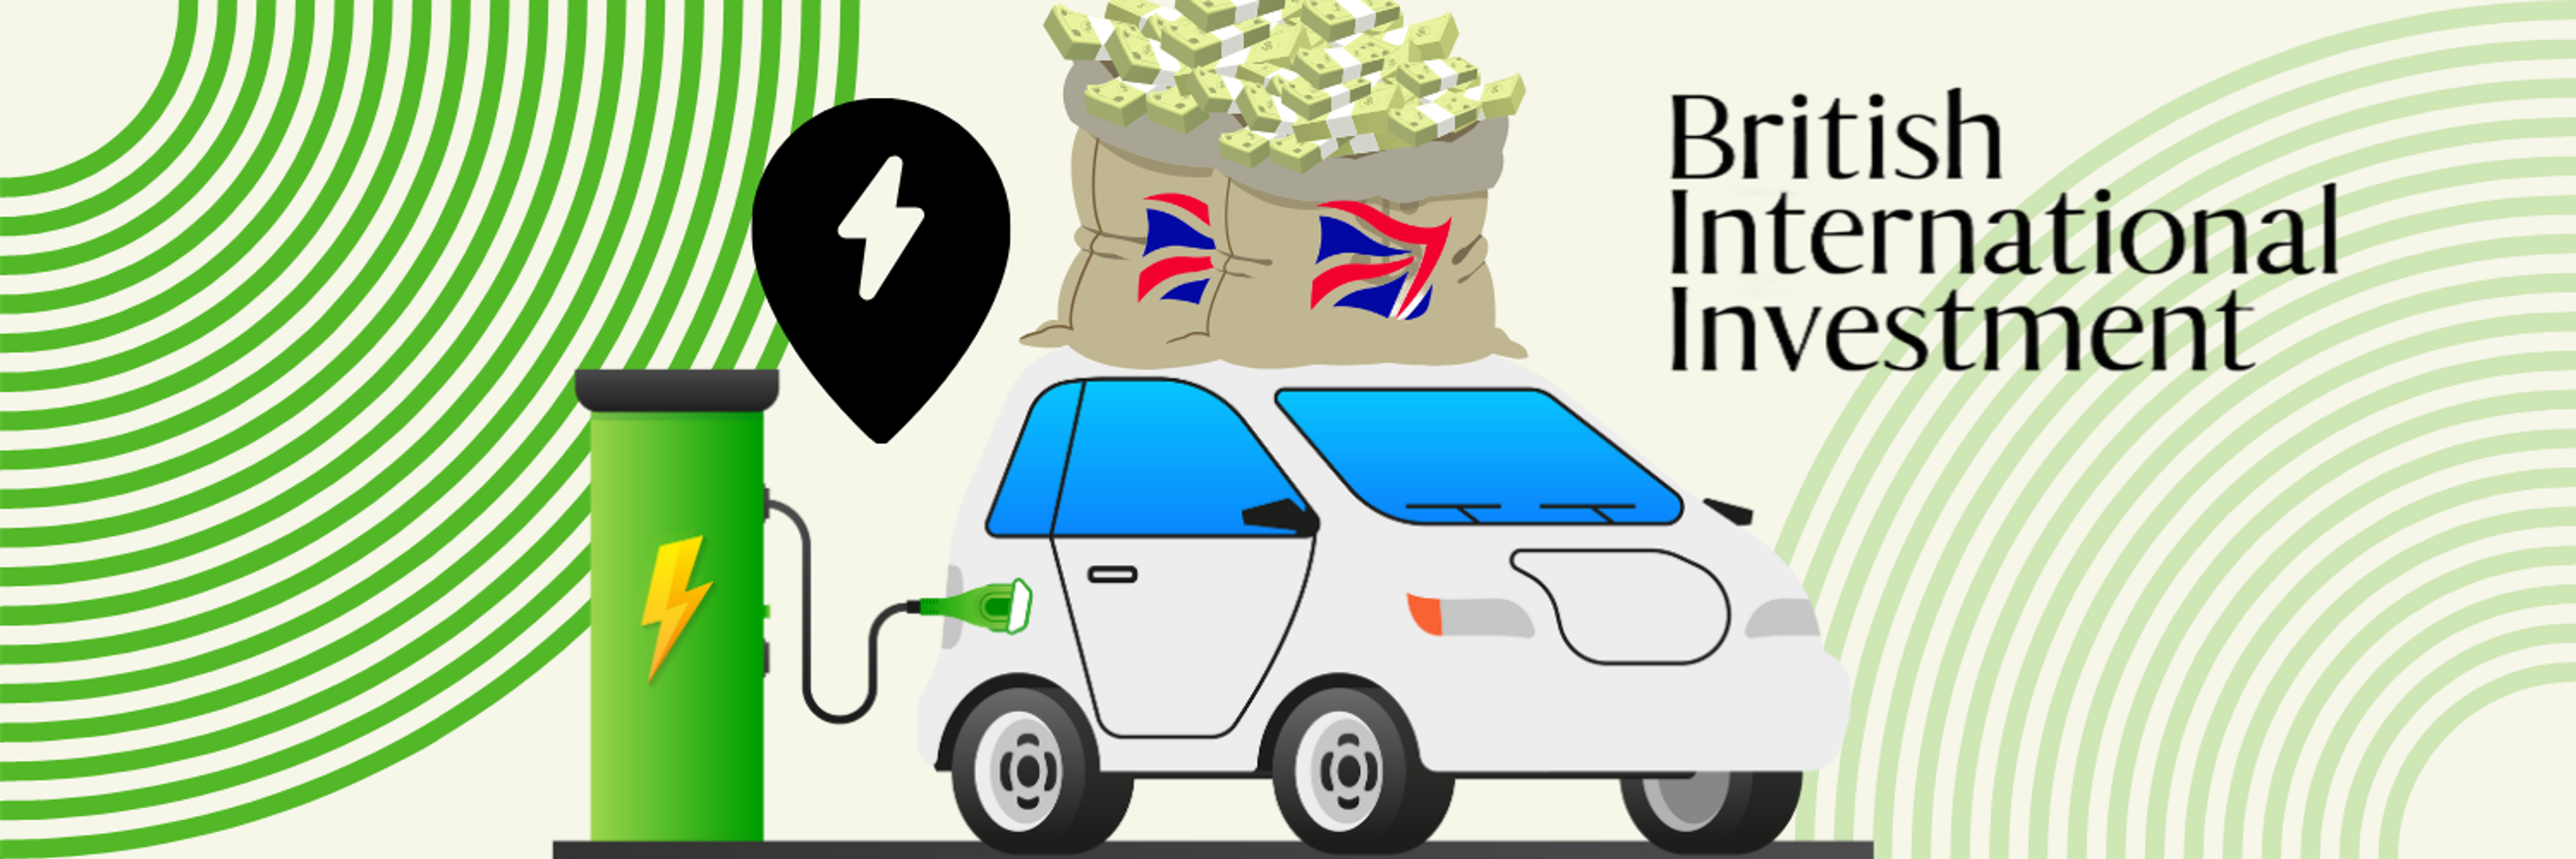 The image is a banner for British International Investment, featuring a graphic design related to the electric vehicle (EV) industry. On the left, there's a green electric charging station with a white and blue electric car connected to it, symbolizing the charging process. In the center, there are two large bags of money adorned with the UK flag, representing significant financial investment. A large black lightning bolt symbol next to the money bags emphasizes the focus on electric power. The background is decorated with green and white curved lines, suggesting energy and movement. The company name "British International Investment" is prominently displayed, anchoring the theme of the banner.